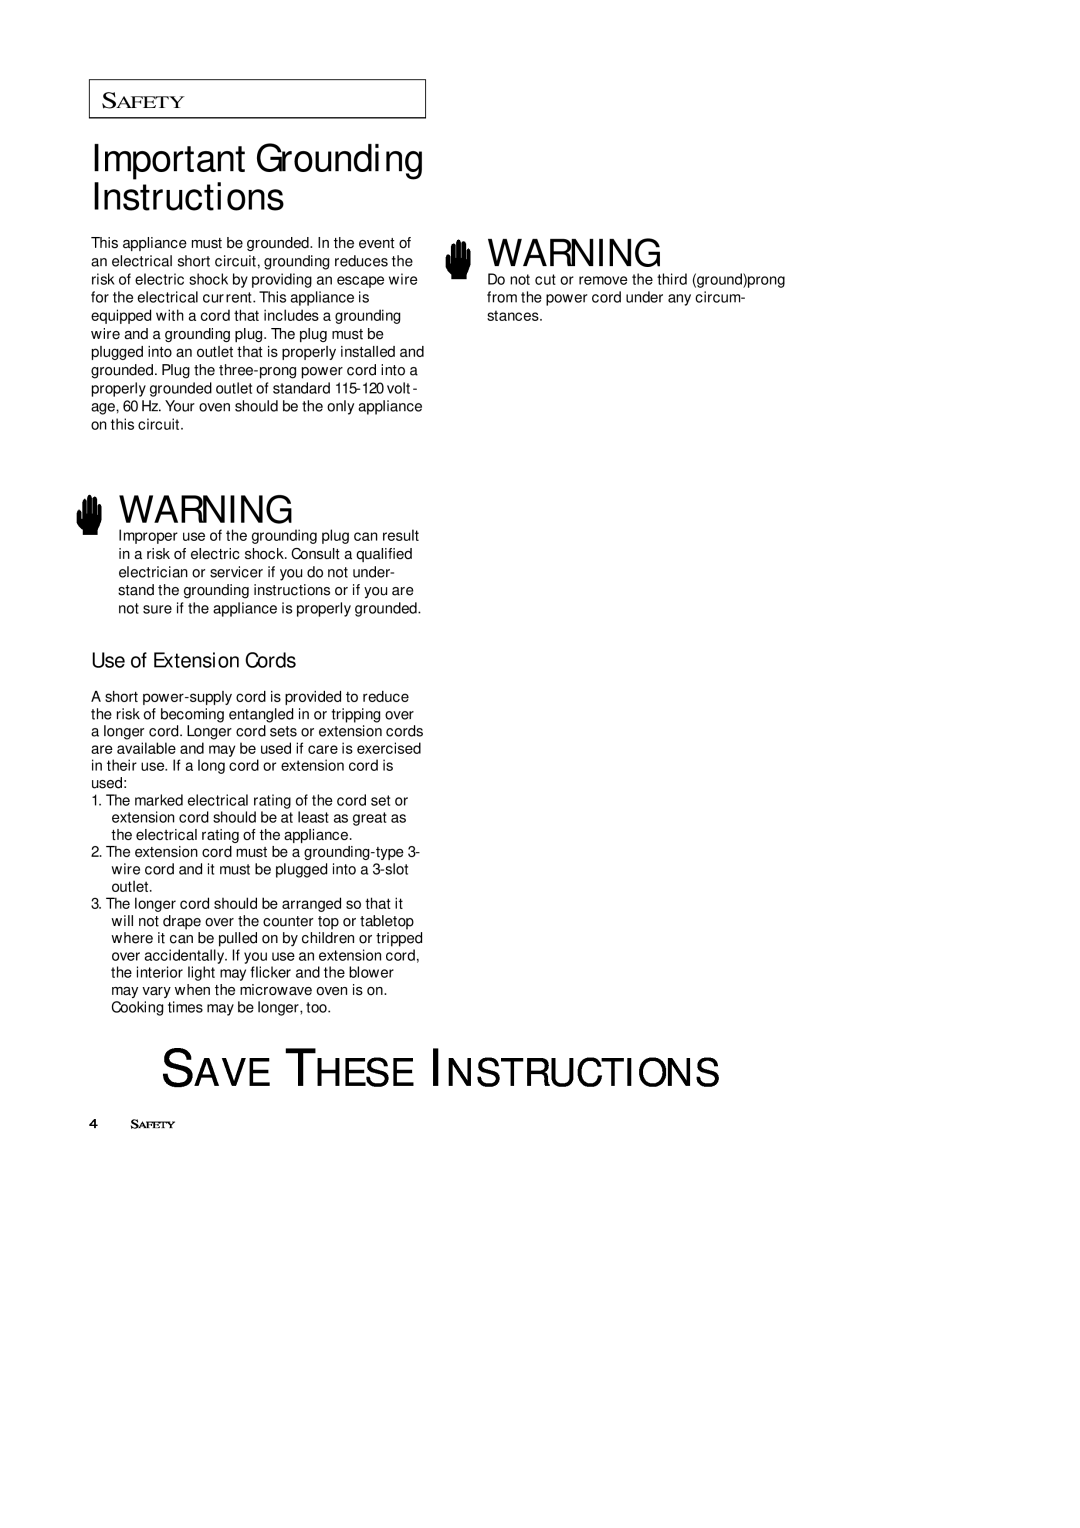 Samsung MW5592W, MW5593G, MW7593G Use of Extension Cords, Save These Instructions, Important Grounding Instructions, Safety 